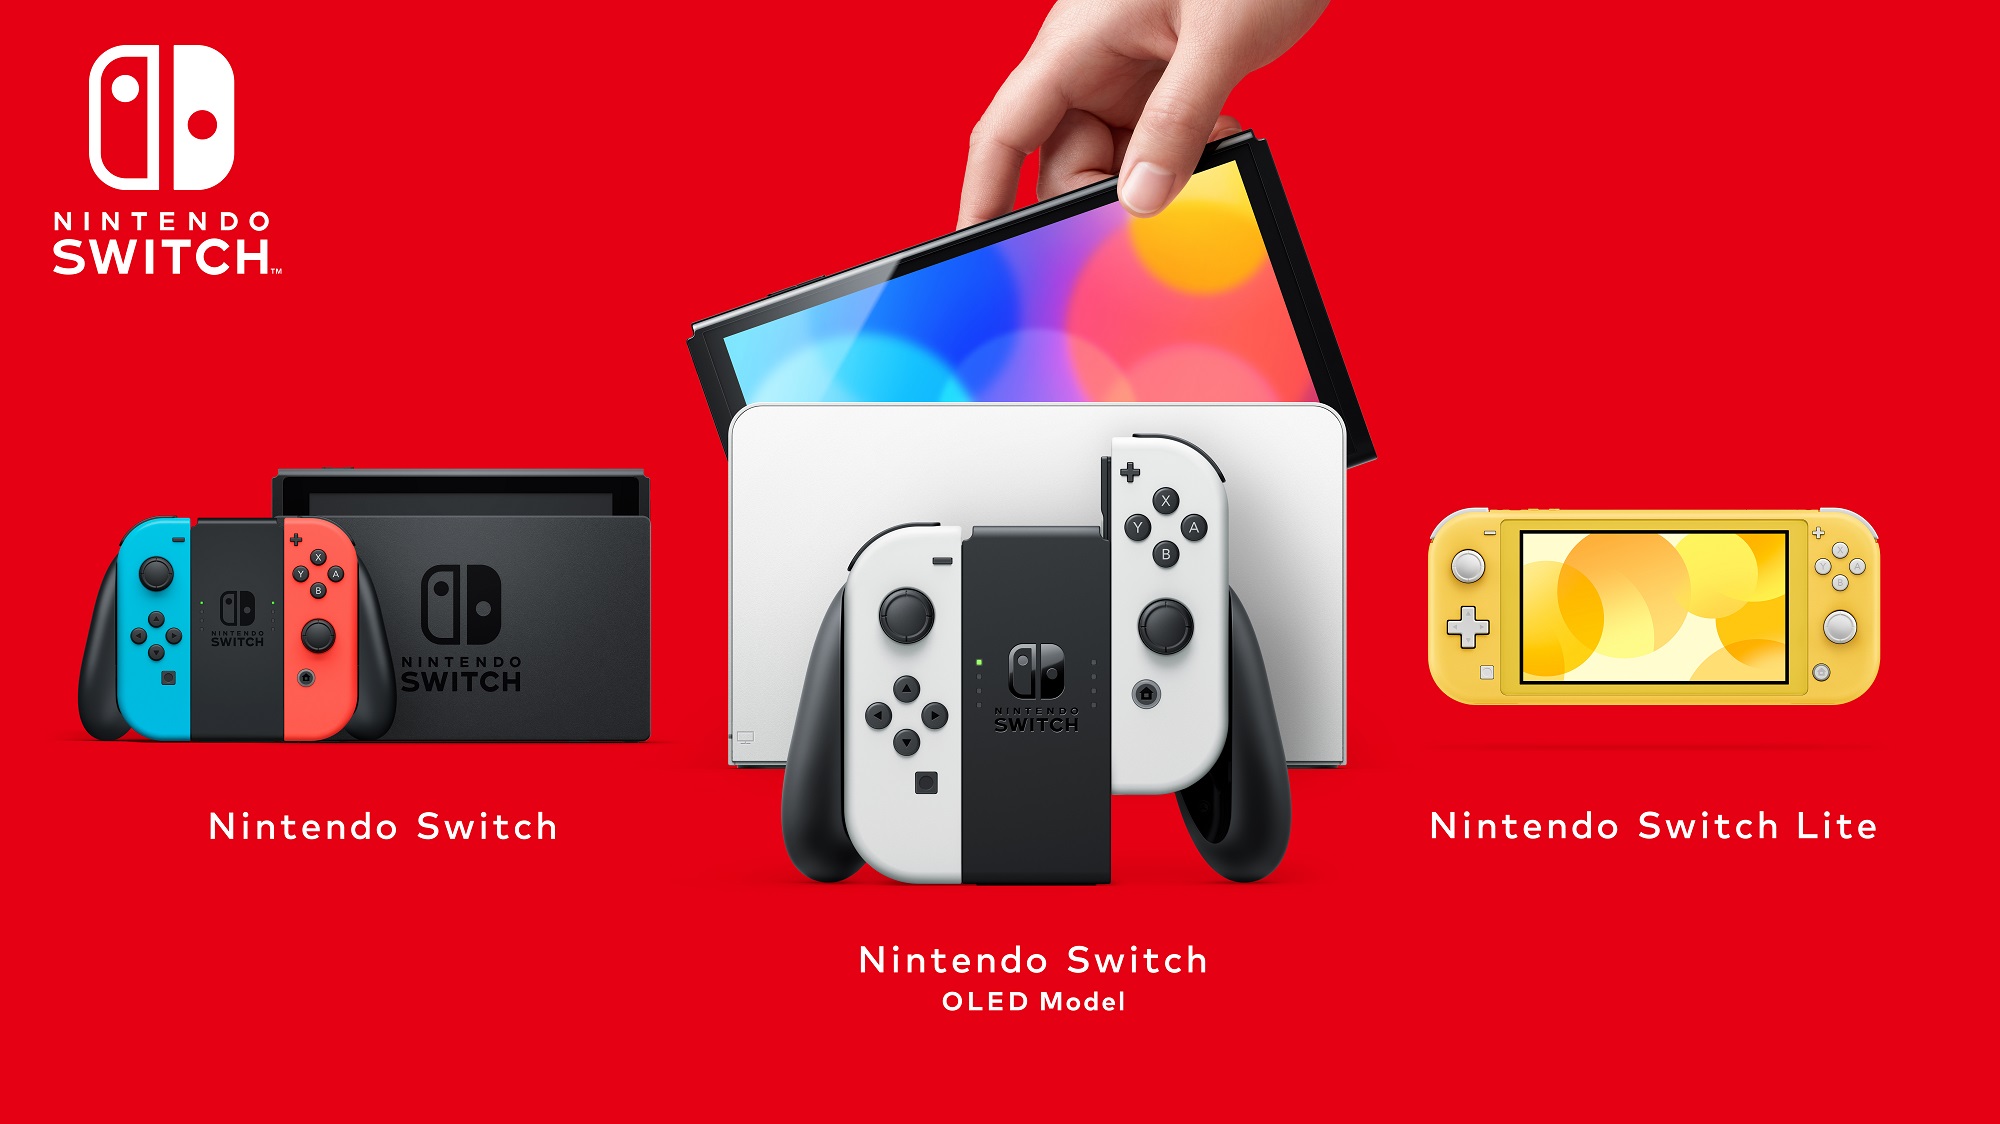 Nintendo Switch 2 will have an 8-inch LCD screen, report claims